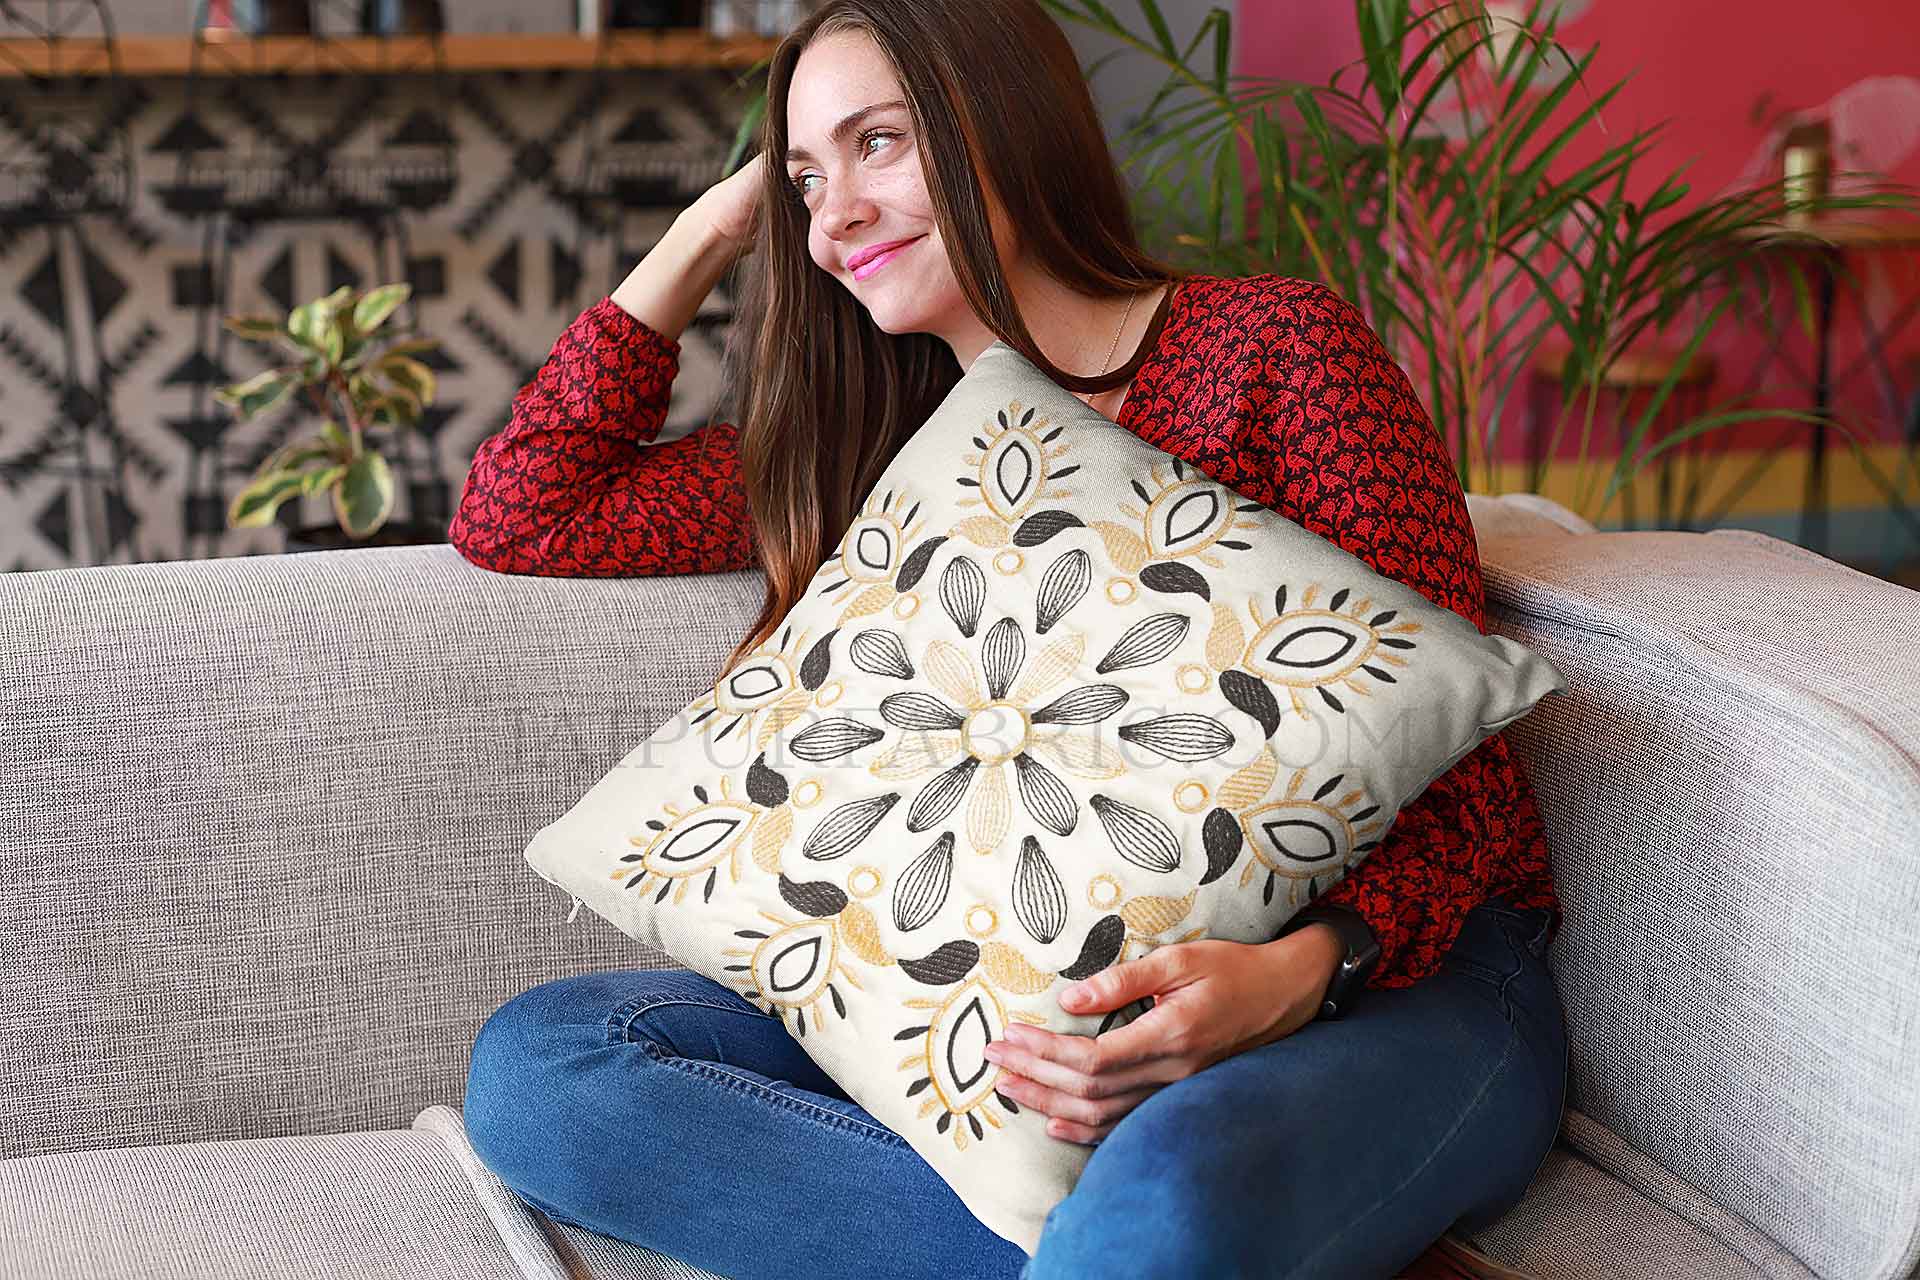 Off White Color Vintage Floral Embroidery Cotton Cushion Cover